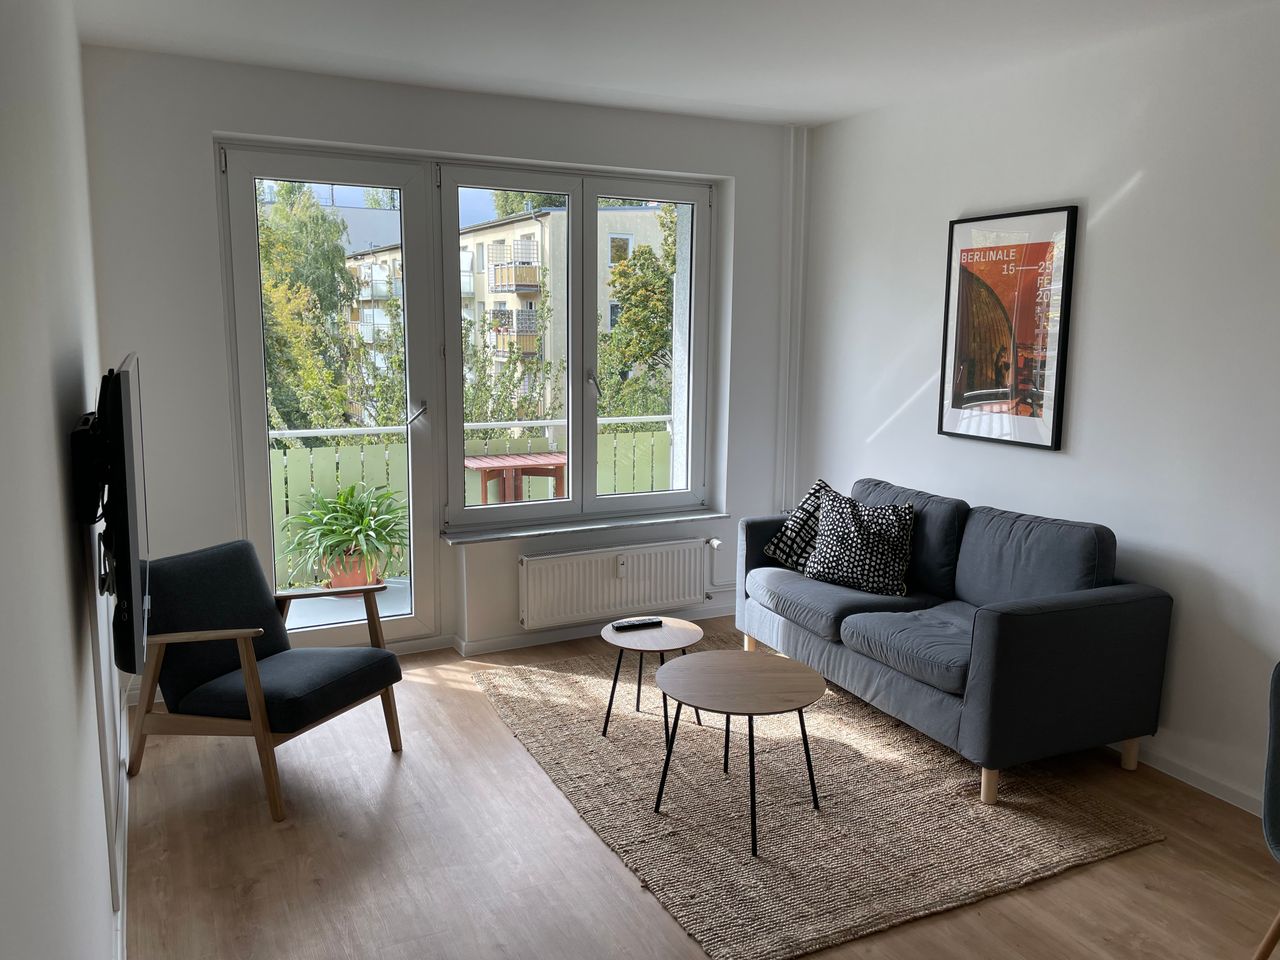 Renovated, super central, modern flat in Mitte, 2 rooms plus kitchen and balcony